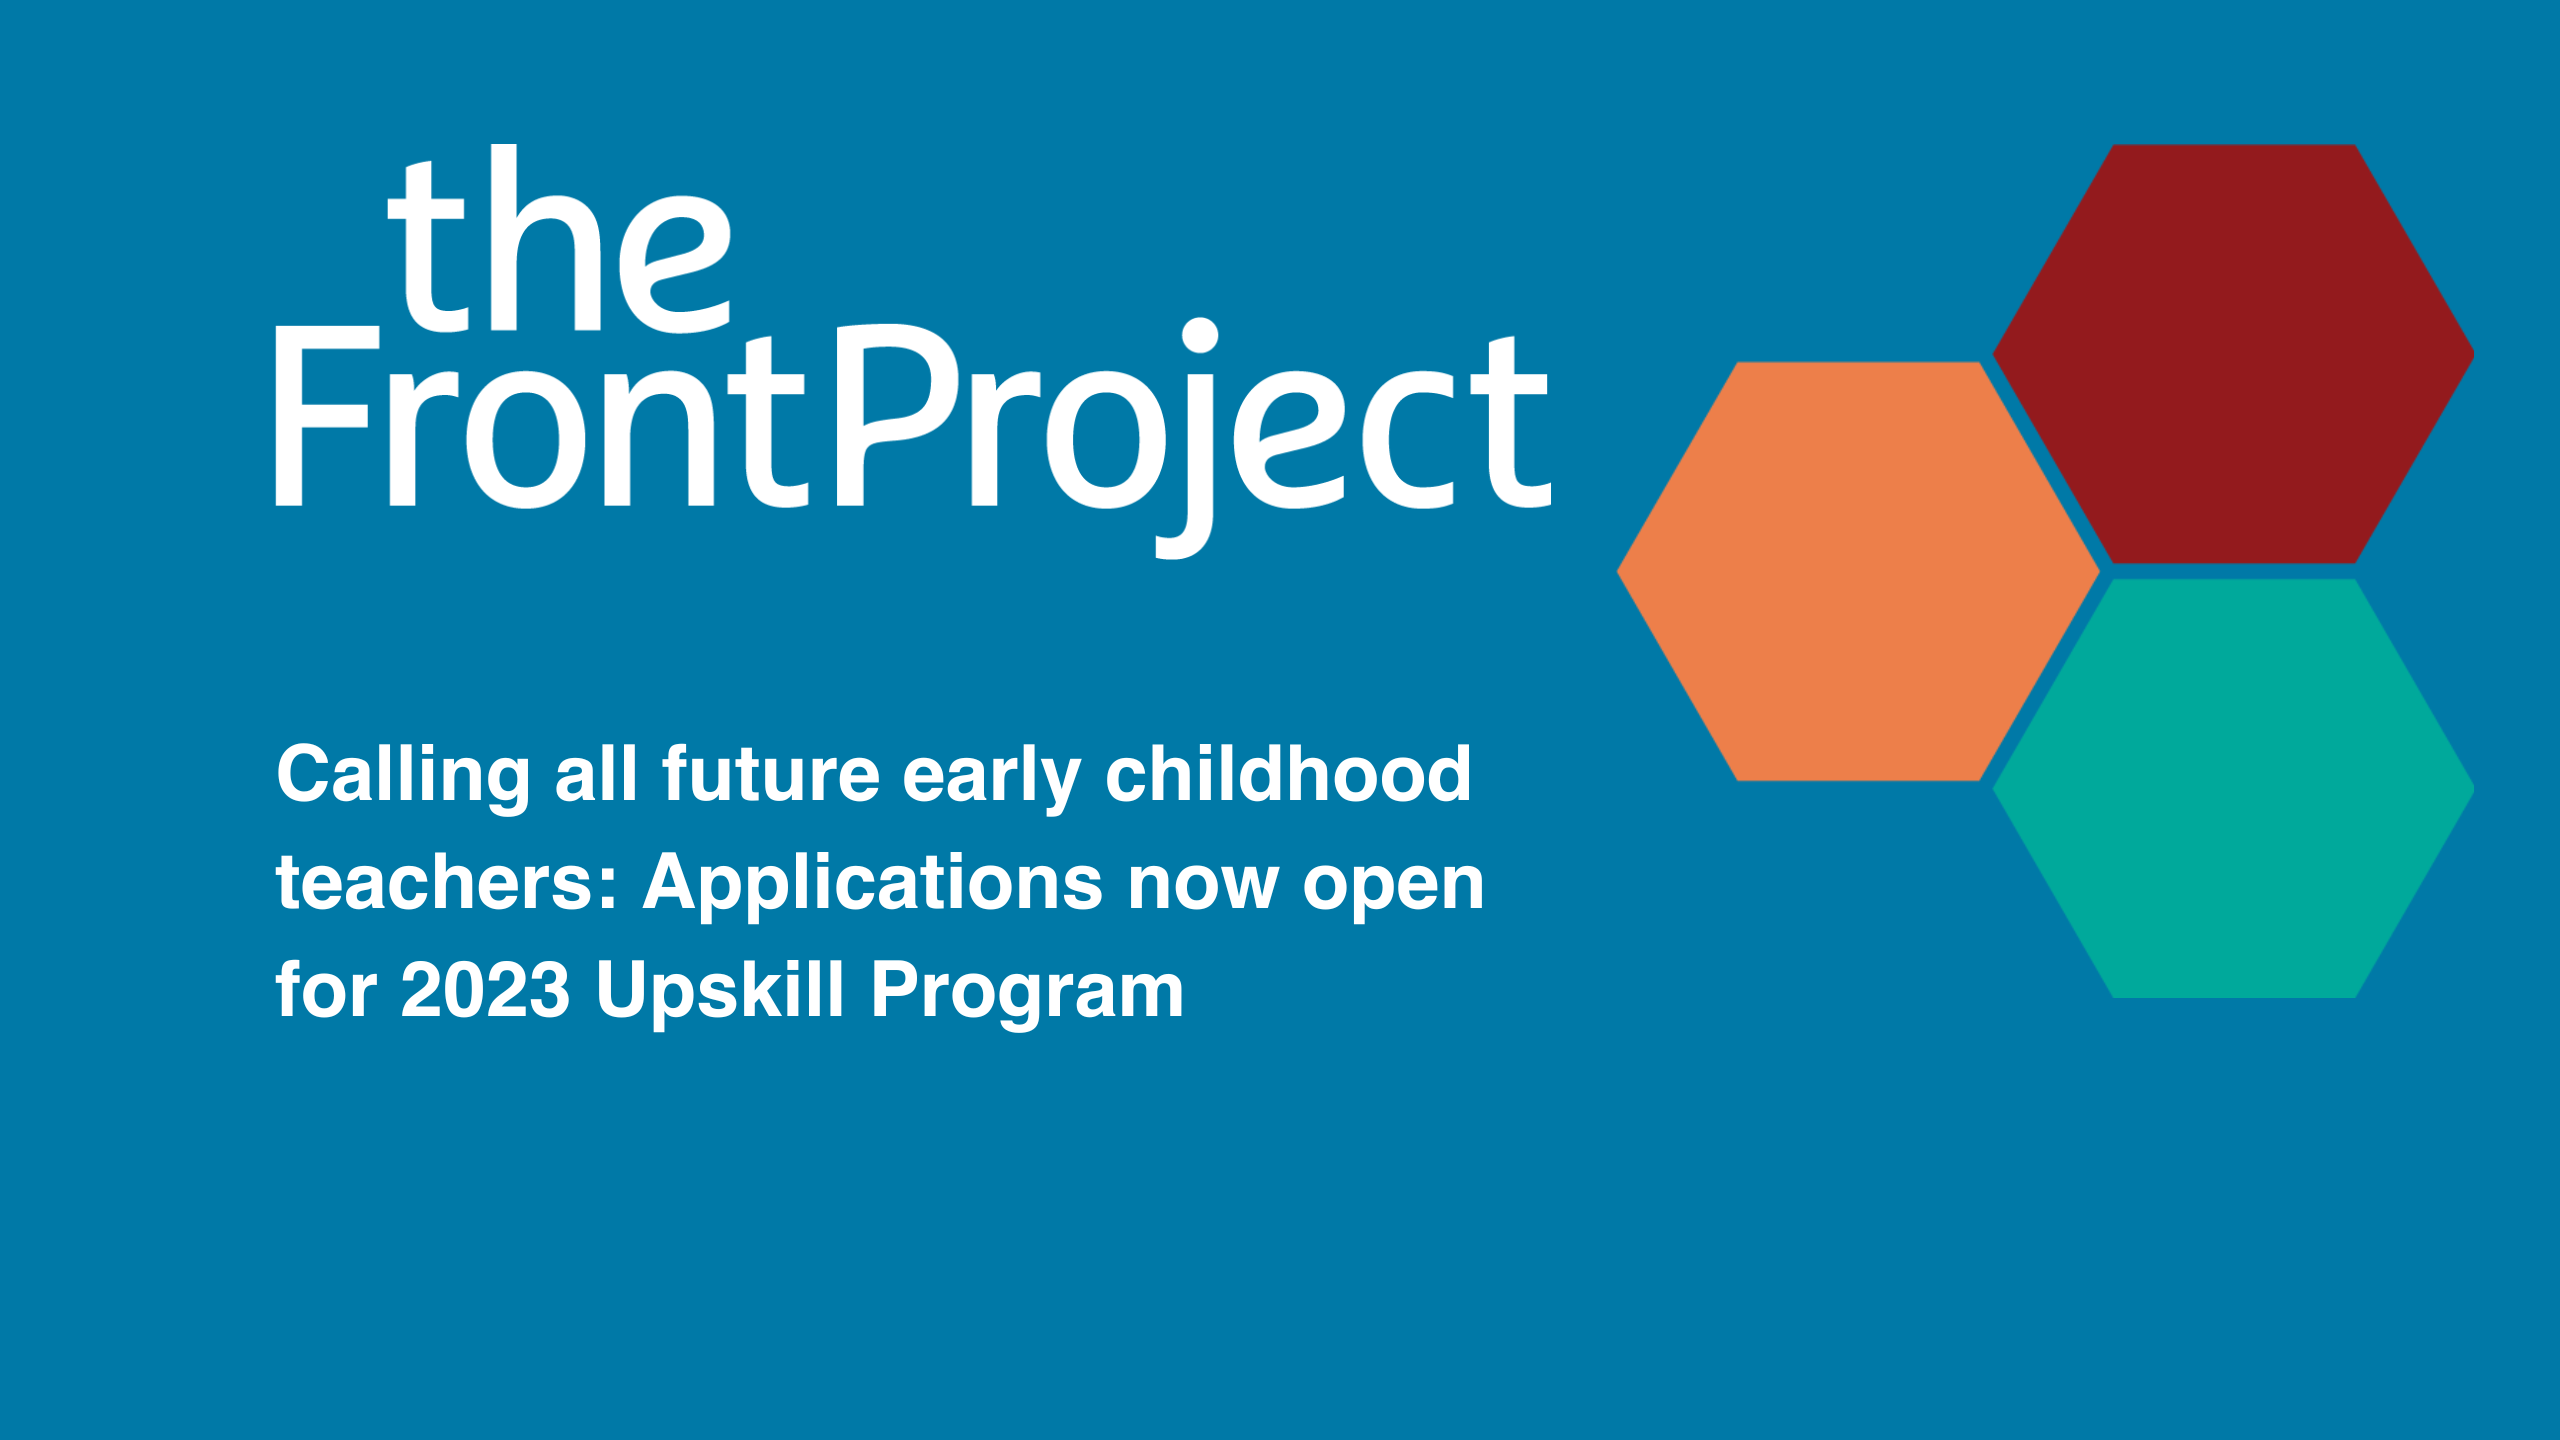 Calling all future early childhood teachers: Applications now open for 2023 Upskill Program  